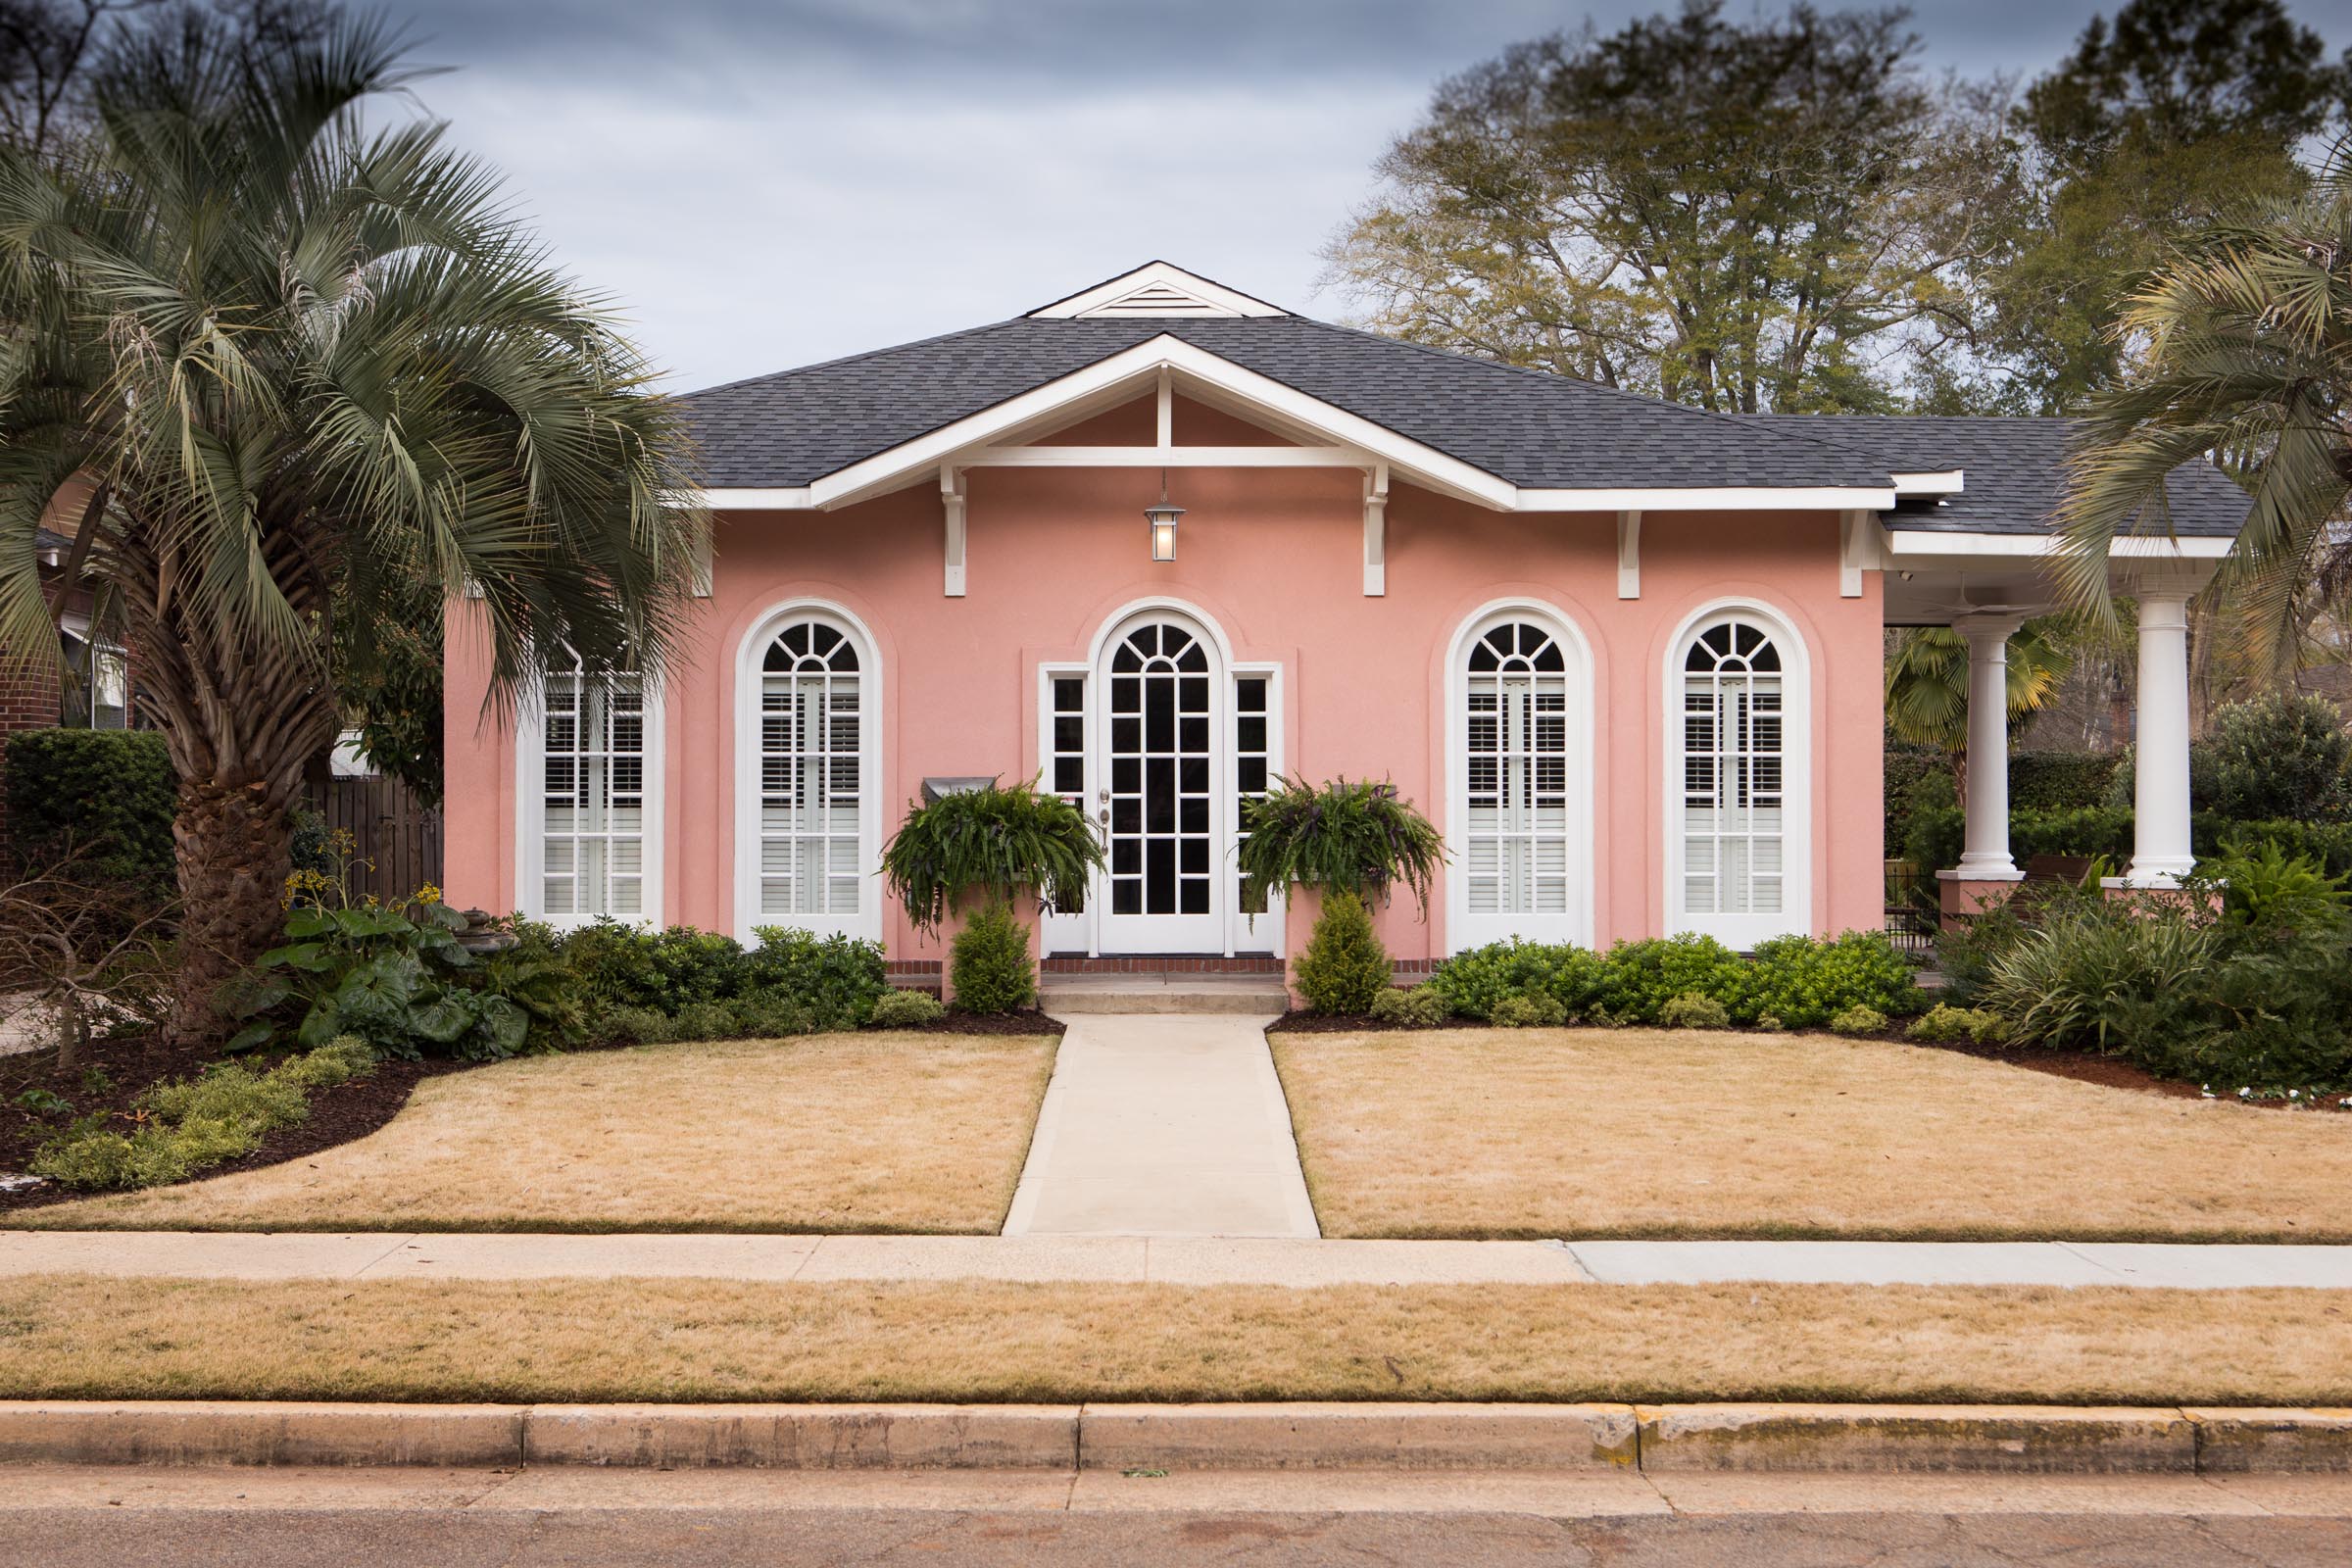 After a tree fell and destroyed their Shandon home, Shari Hutchinson and Tim Carrier used Stucco Unlimited to help them match the perfect shade of pink from the original stucco. ‘New Coral’ turned out to be the right shade — a combination of peach, pink, and coral. For a peek inside The Pink House, turn the page to walk through Shari and Tim’s stunning interior.